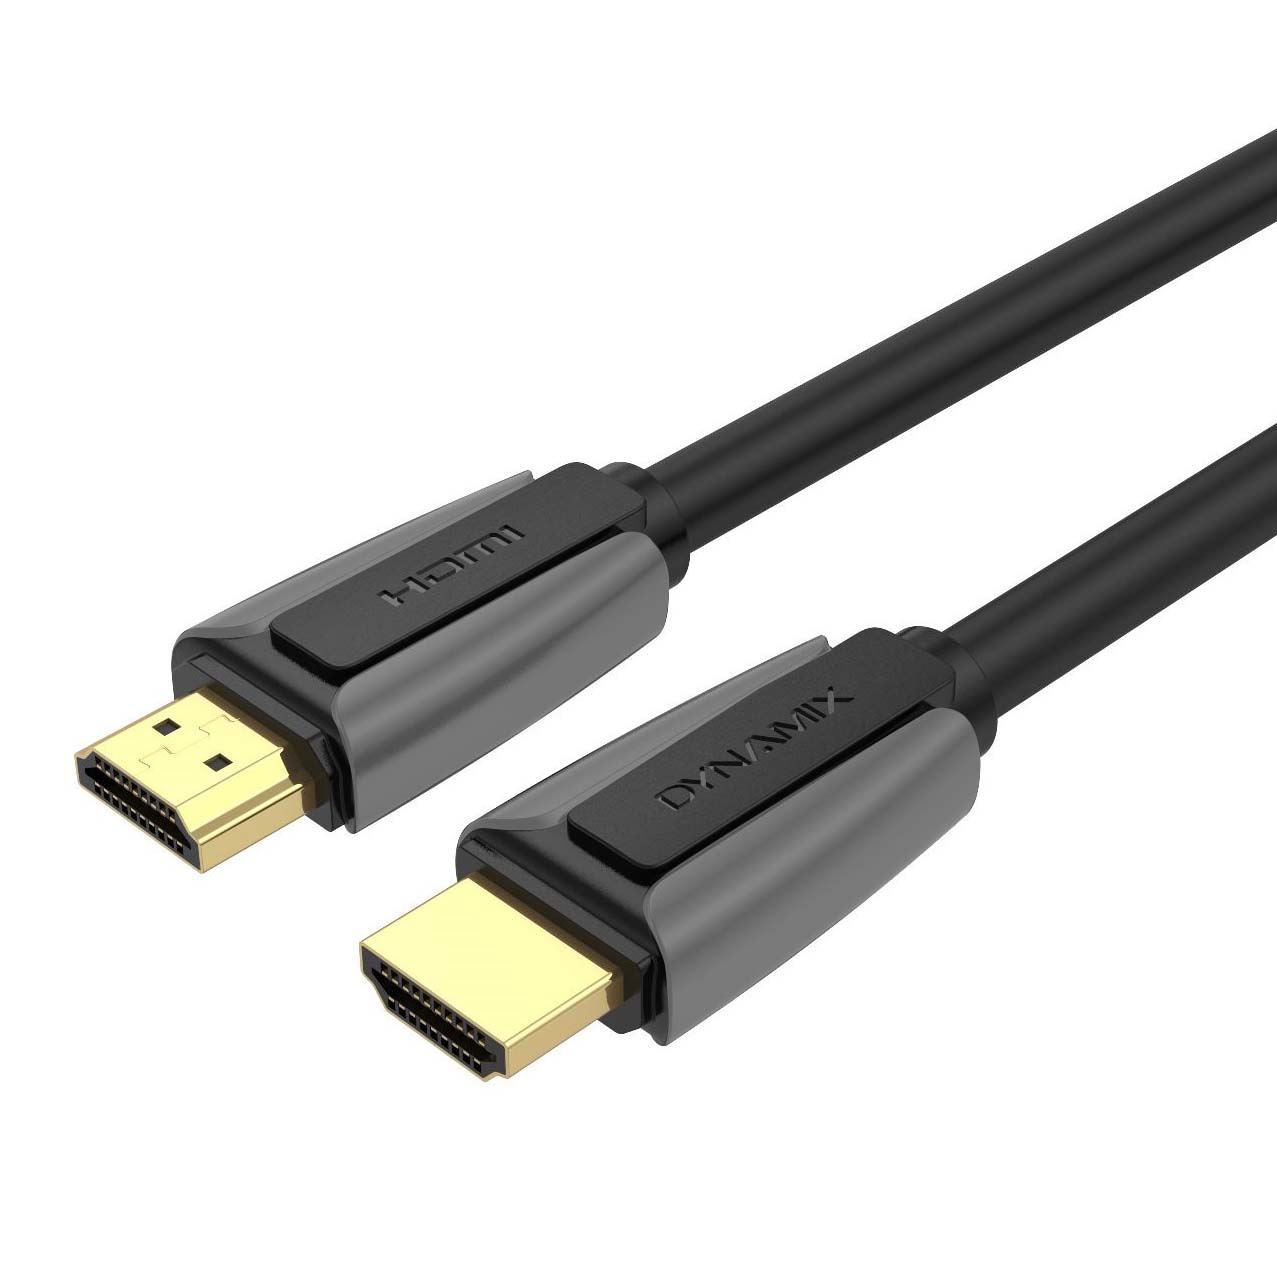 DYNAMIX_2M_HDMI_2.1_Ultra-High_Speed_48Gbps_Cable._Supports_up_to_8K@120Hz._Supports_Dolby_True_HD_7.1,_HDR10+,_Dolby_Vision_IQ,_eARC,_VRR,_HFR,_QFT,_ALLM,_QMS,_DSC,_G-Sync_&_FreeSync._Gold-Plated 820